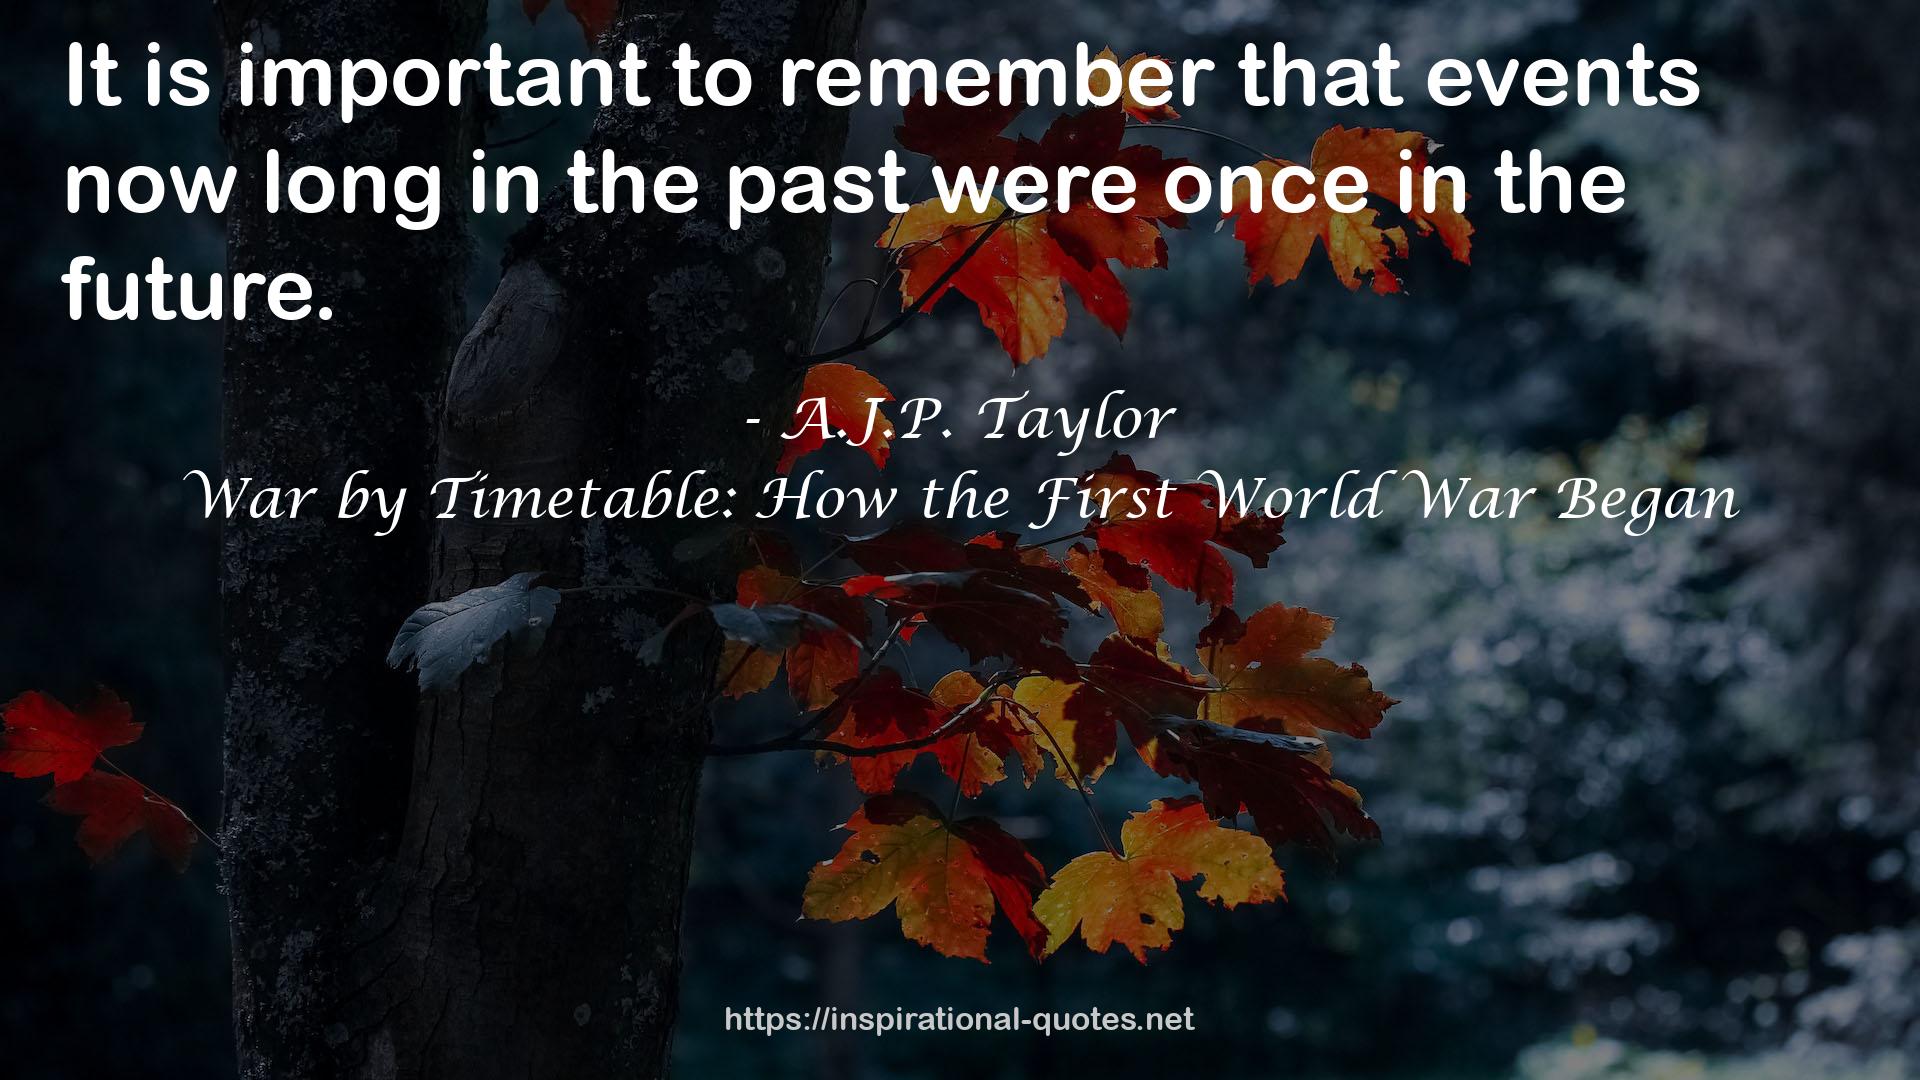 War by Timetable: How the First World War Began QUOTES